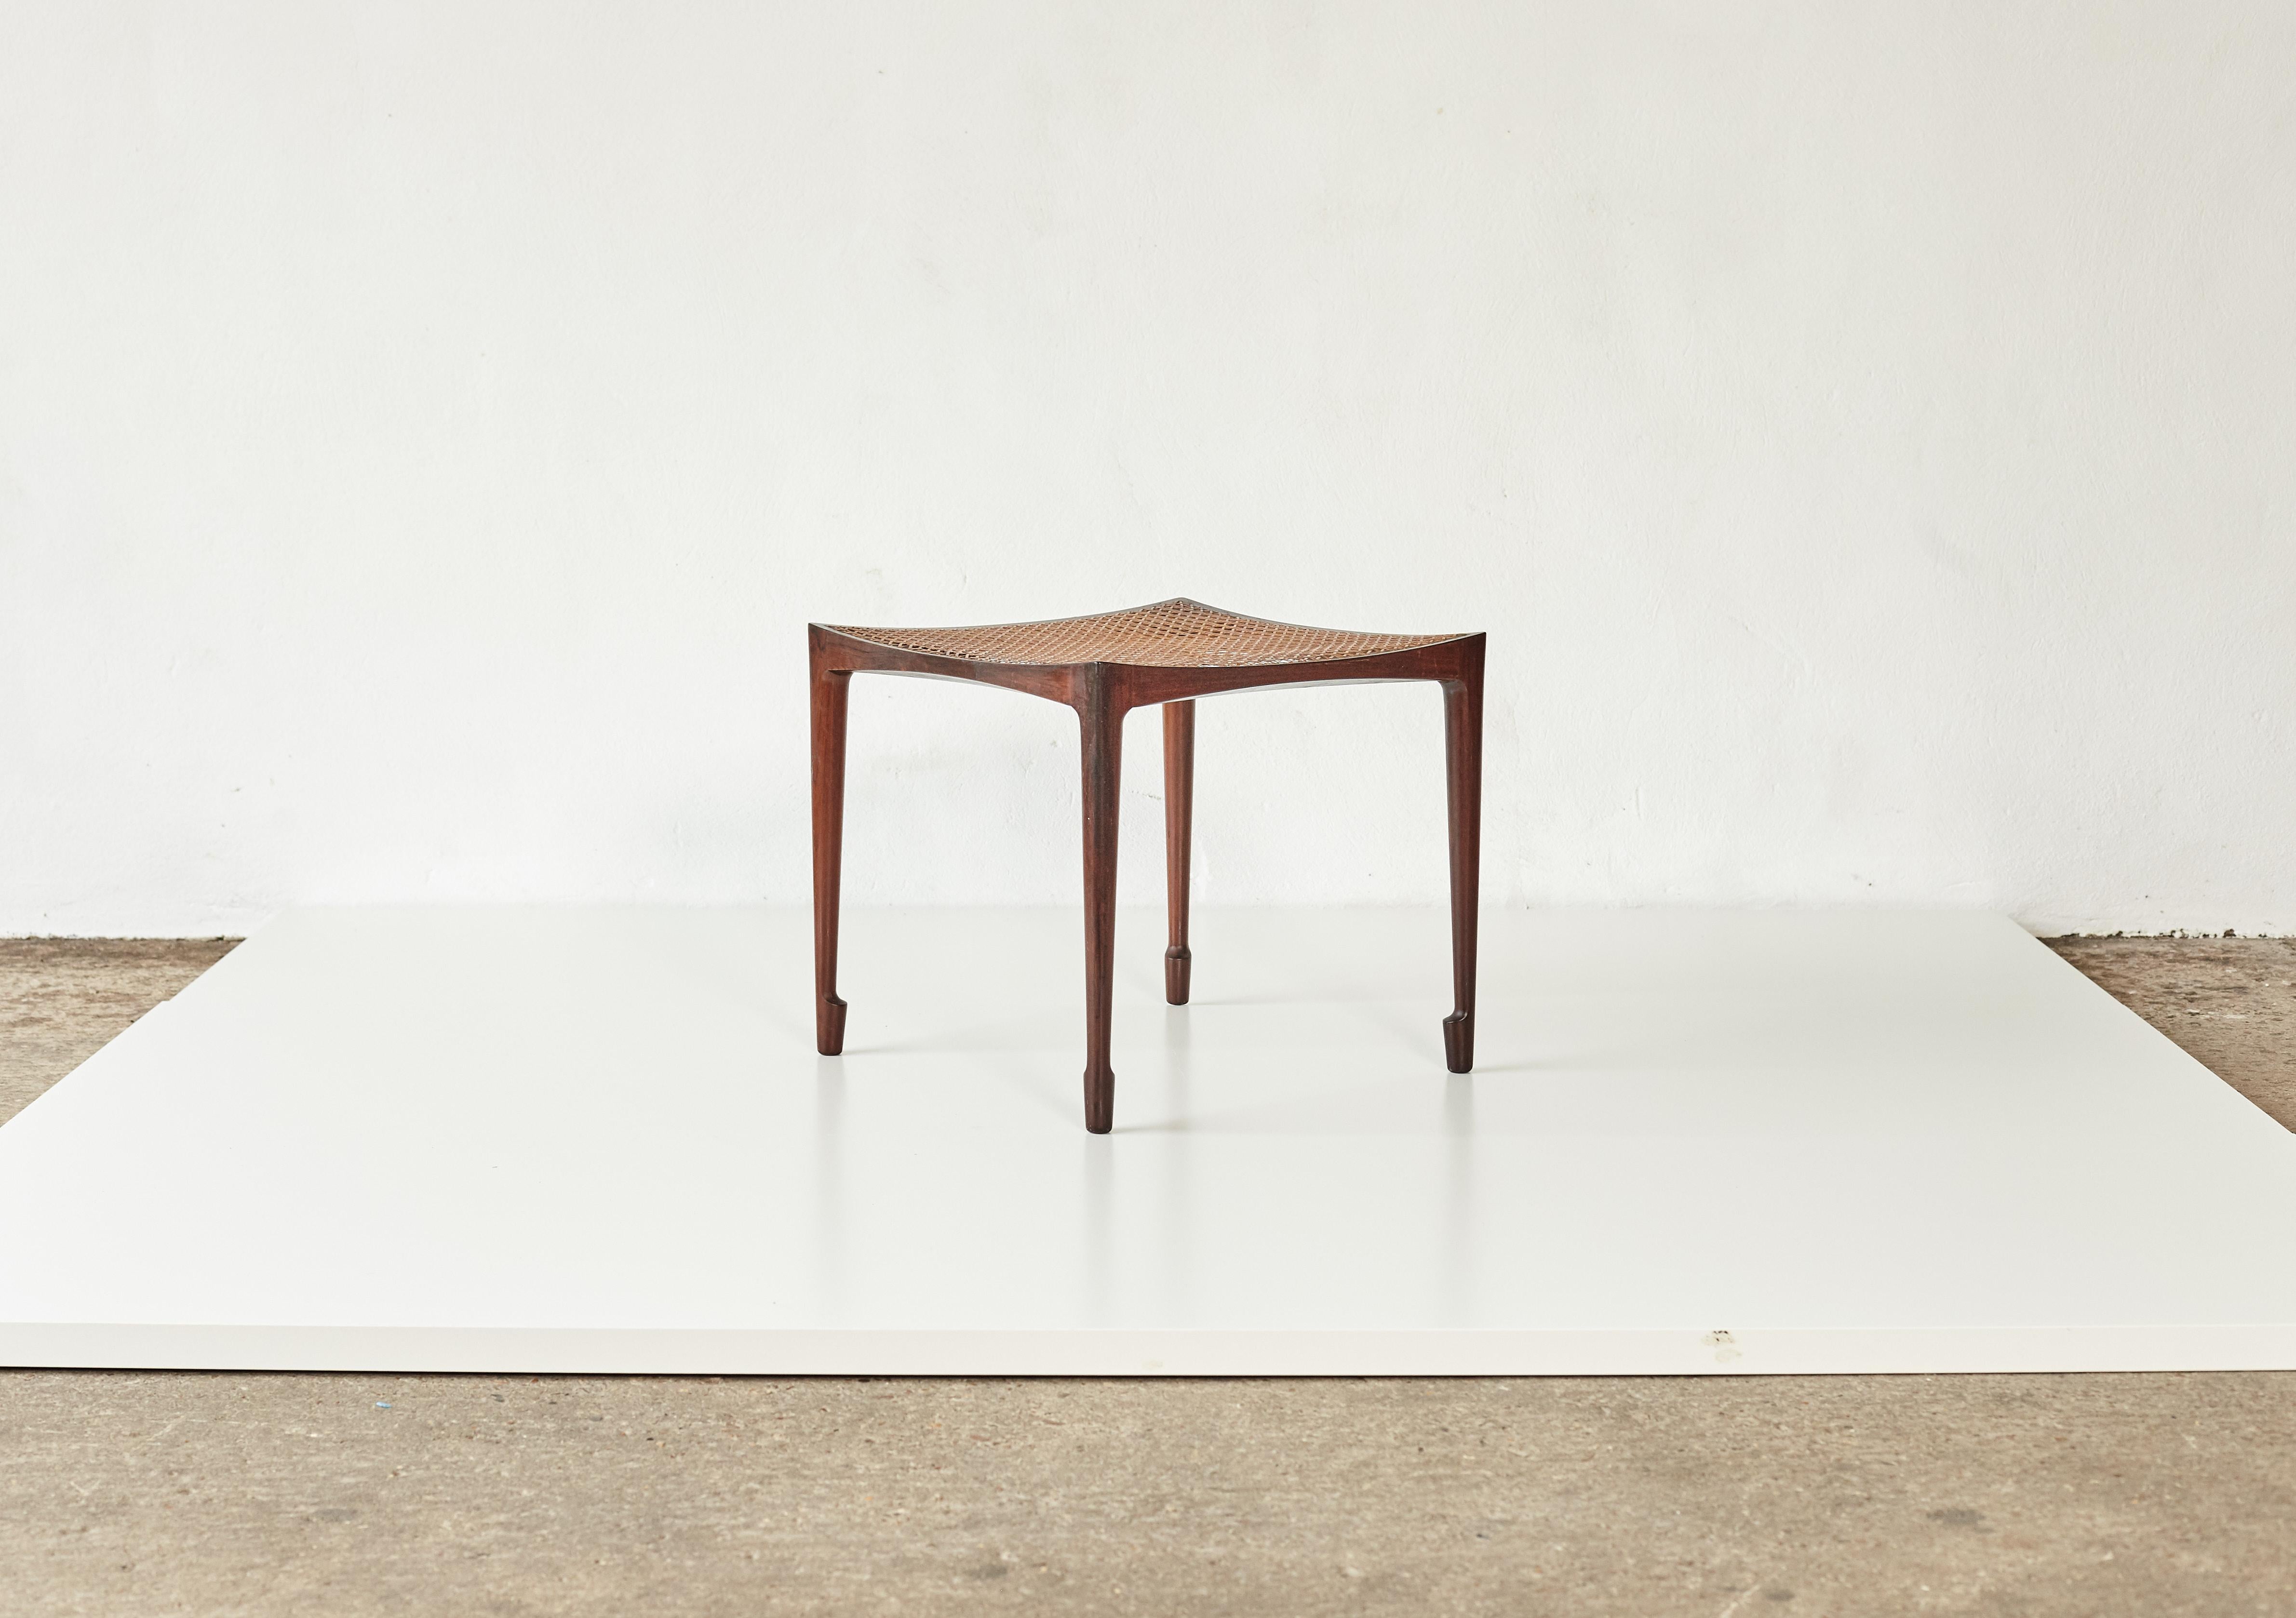 Bernt Petersen rosewood and cane stool, 1960s, Denmark. Good condition, original cane with minor breaks. First exhibited at the cabinet makers exhibition 1958. Produced by Wørts. Ships worldwide.